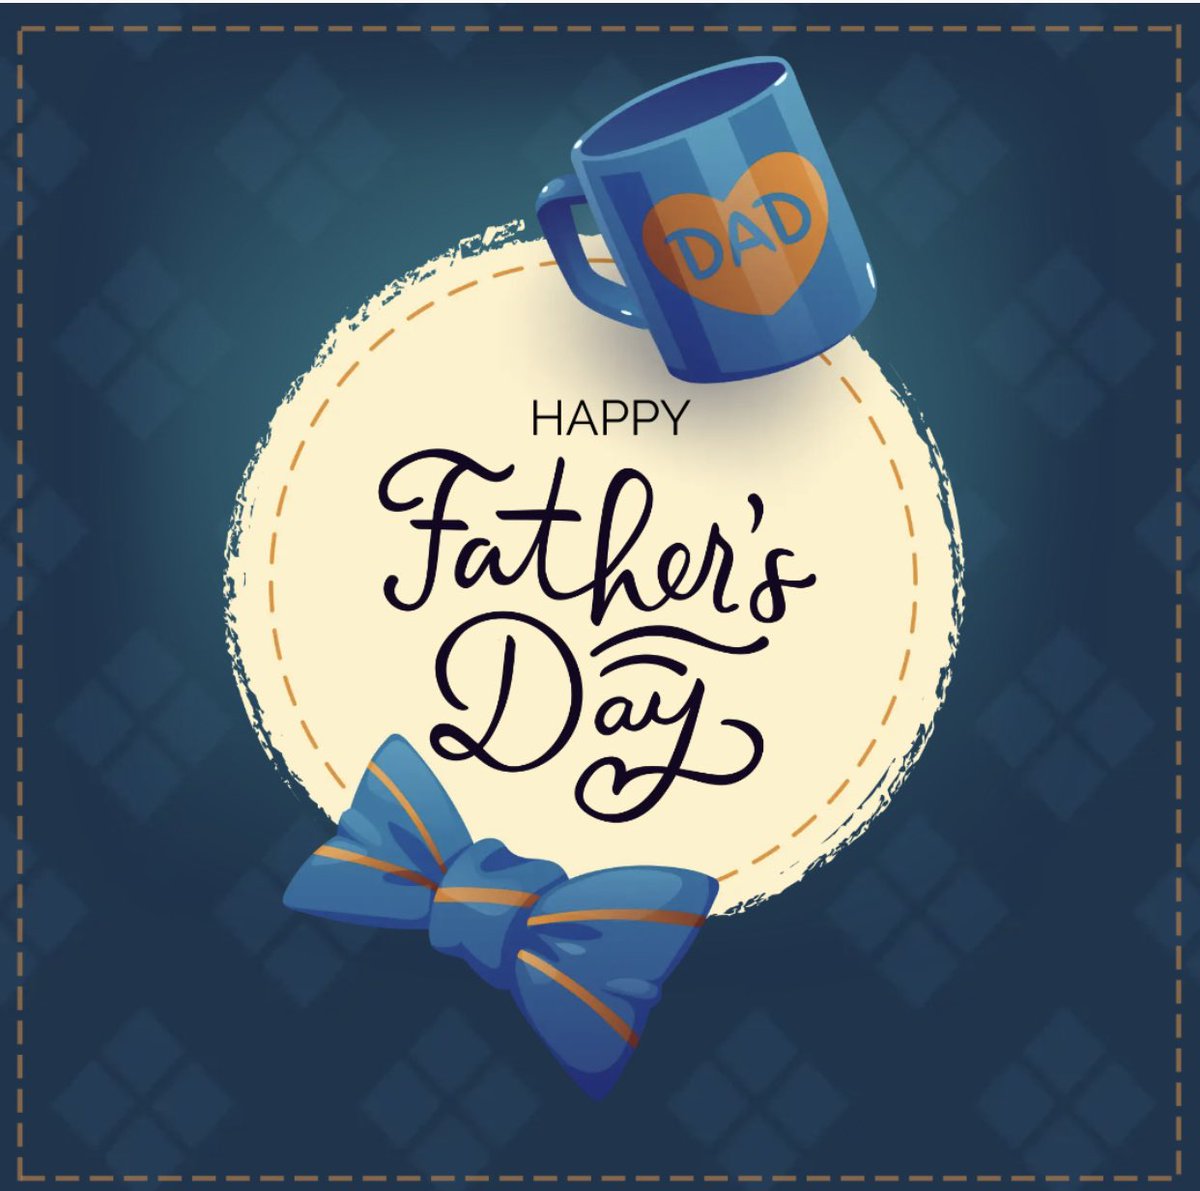 Wishing our Tiger Dads and community a Happy Father’s Day. 💙🐯 #wrthomasmiddleschool #wearetigers🐯 @MDCPSSouth